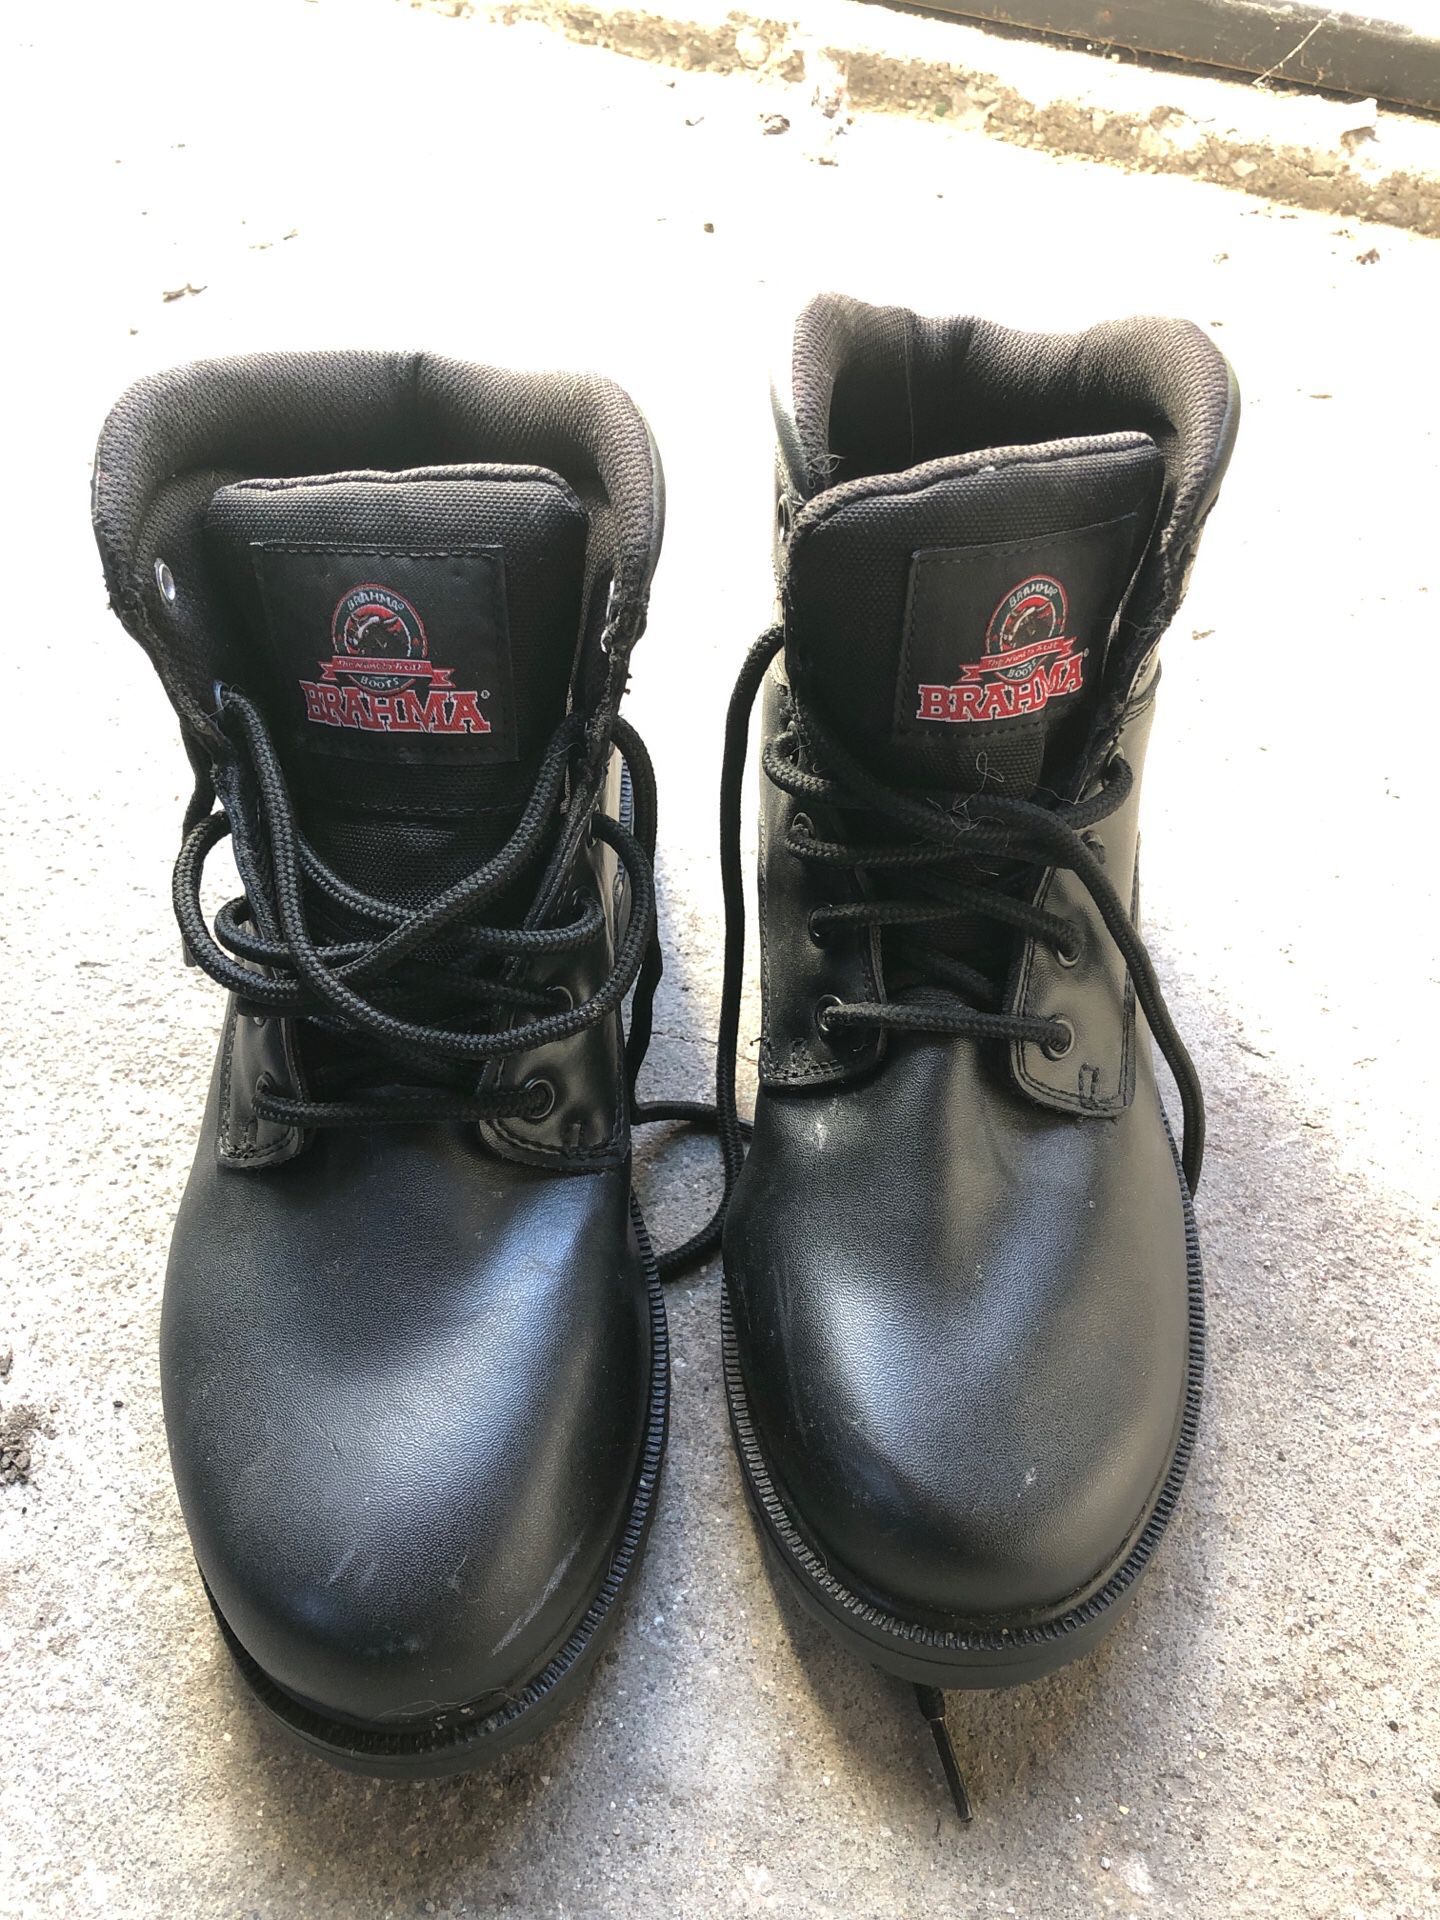 Work boots $15